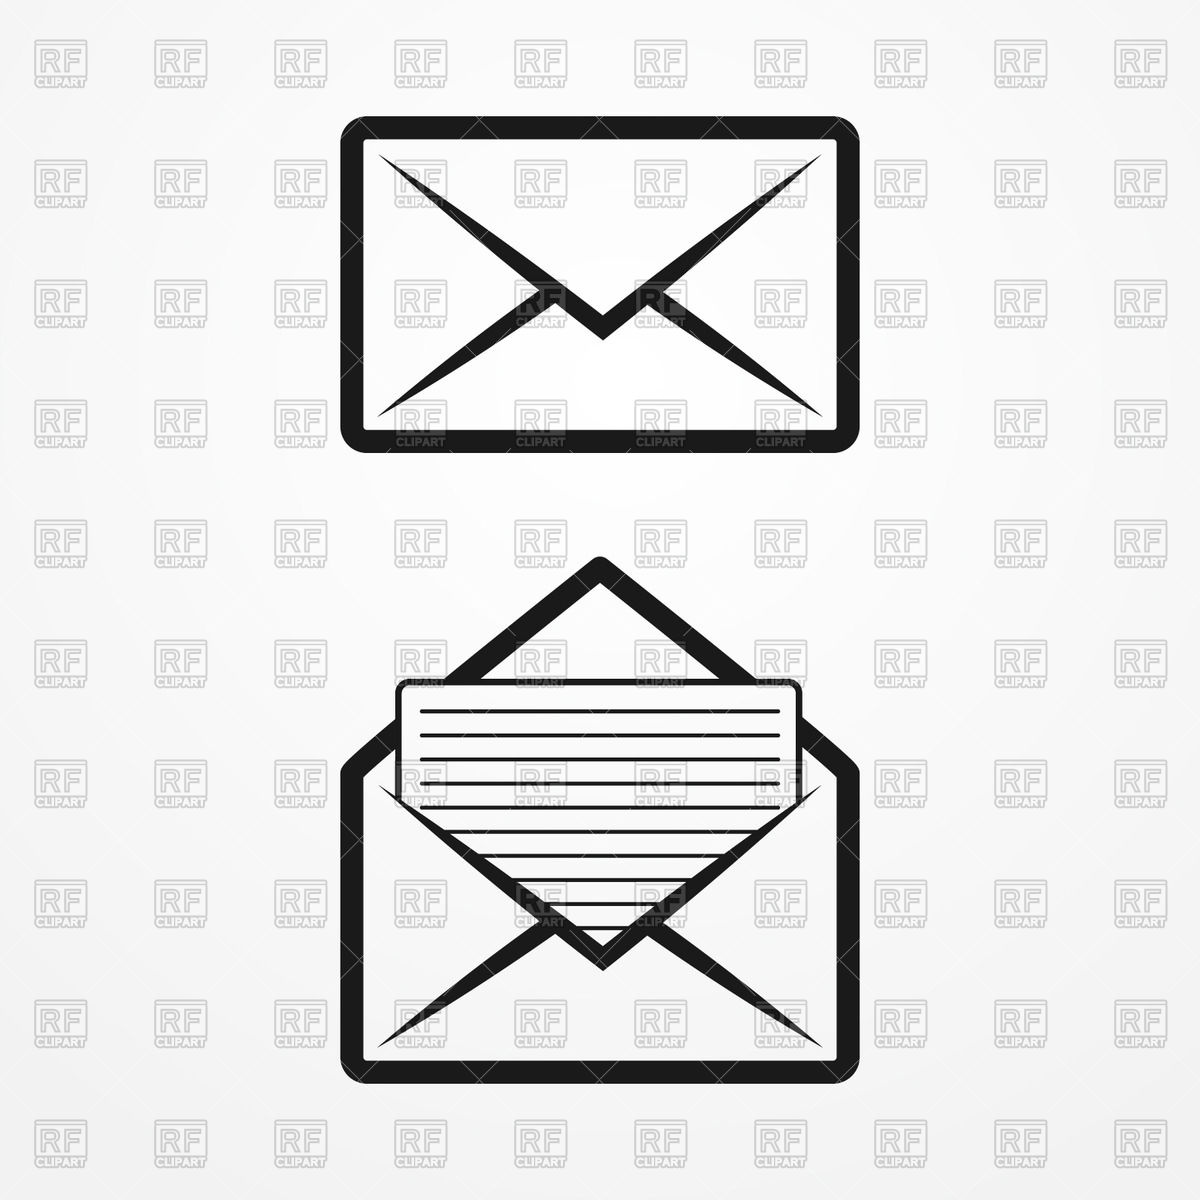 29  Free Email Icons Download | Free  Premium Templates